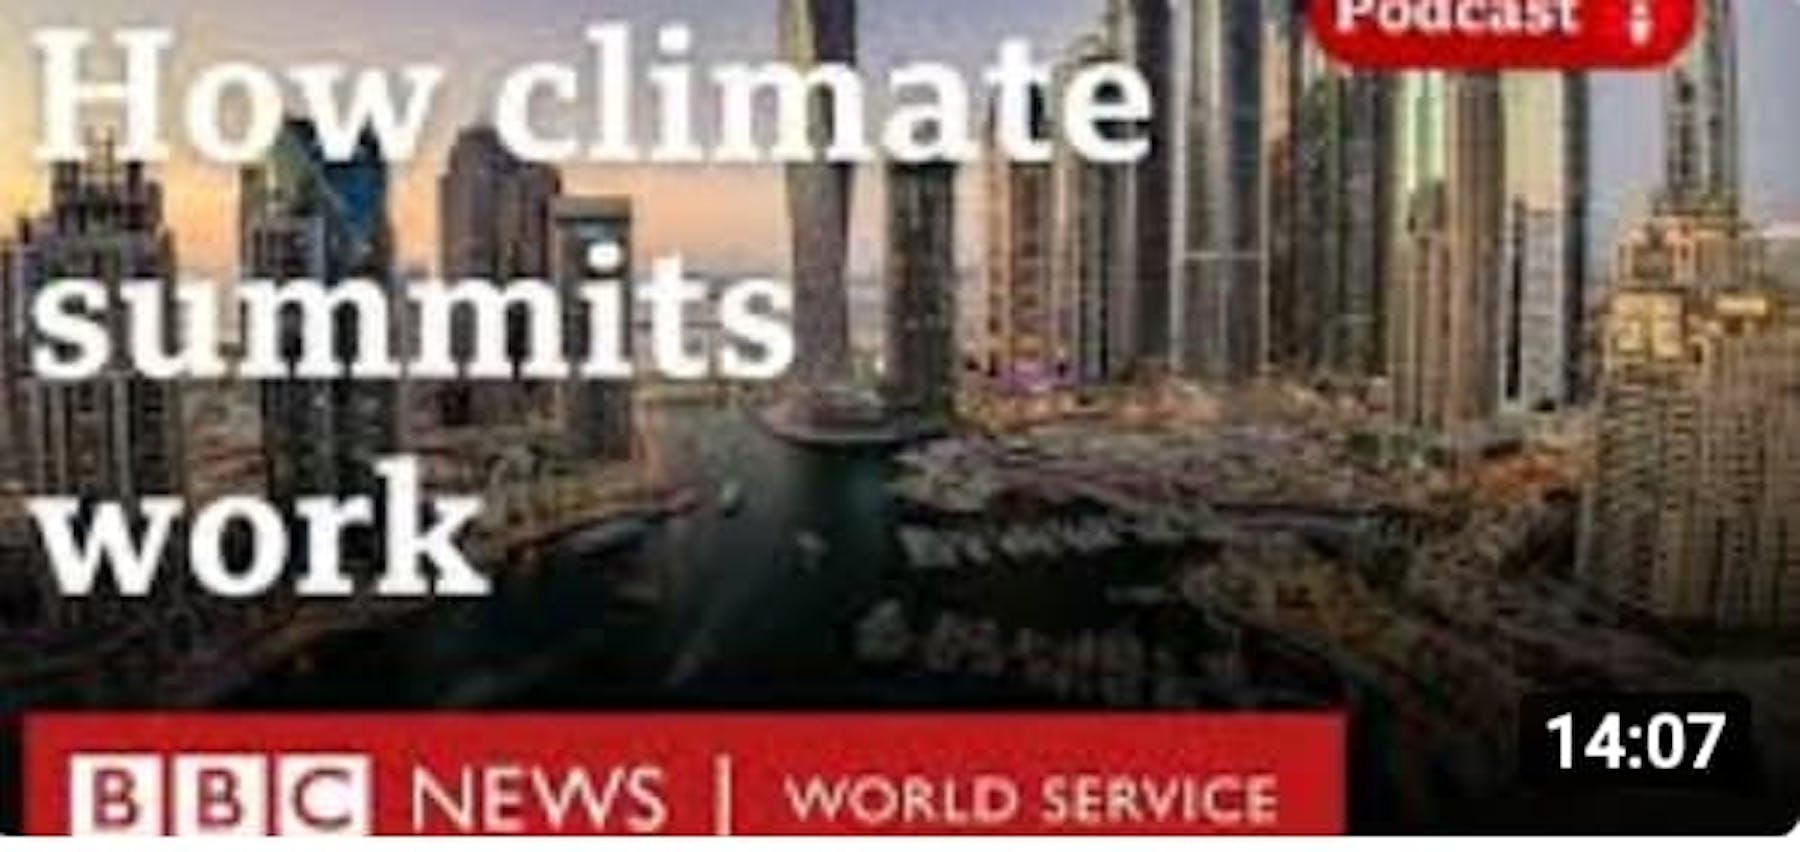 how climate summits work